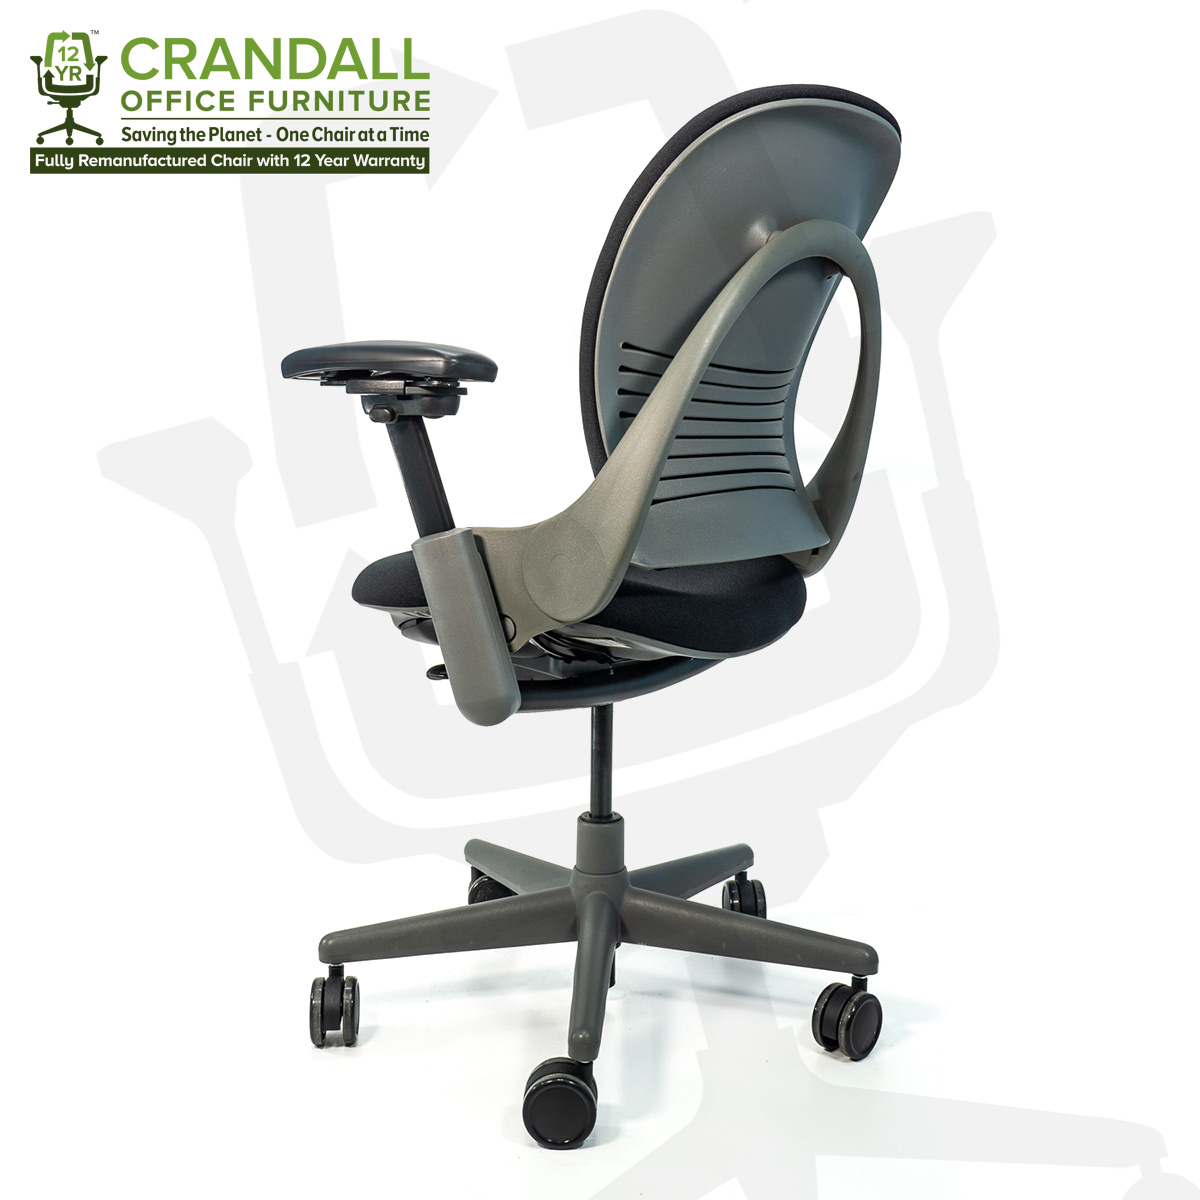 Crandall Office Furniture Remanufactured Steelcase 462 Leap V1 Office Chair Sterling Frame with 12 Year Warranty 0004